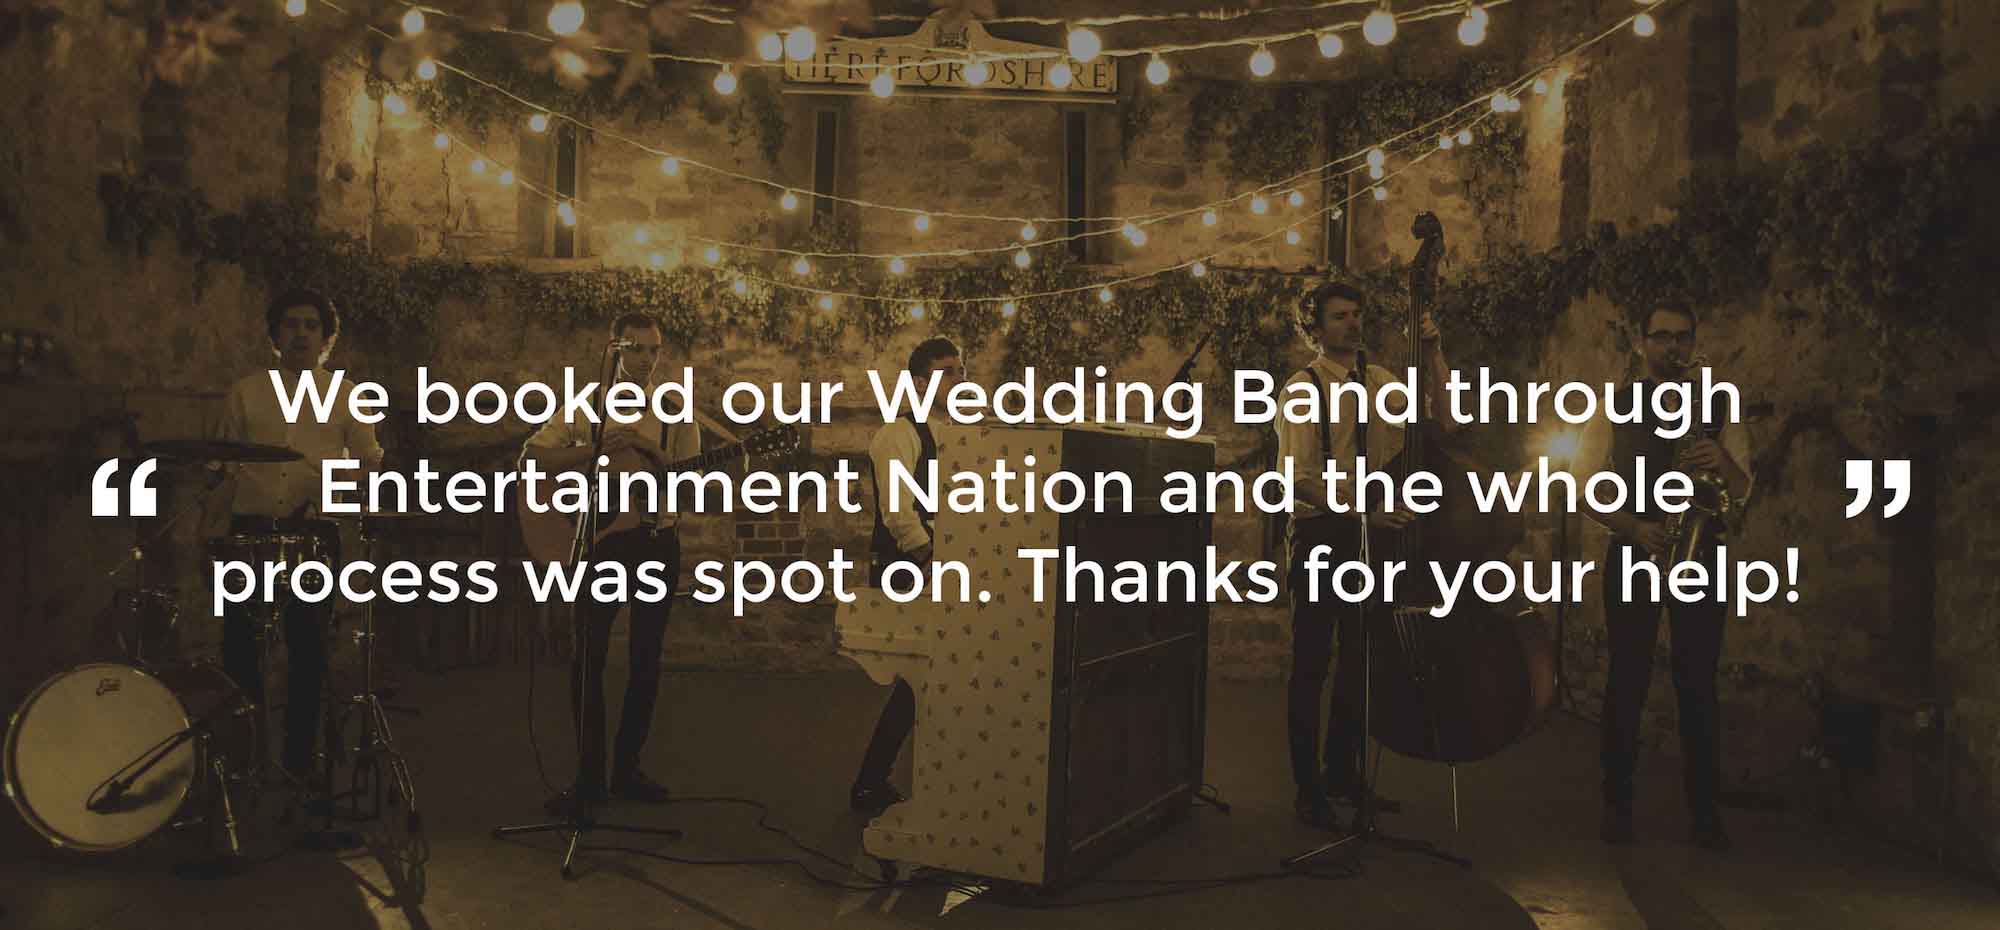 Client Review of a Wedding Band South Glamorgan